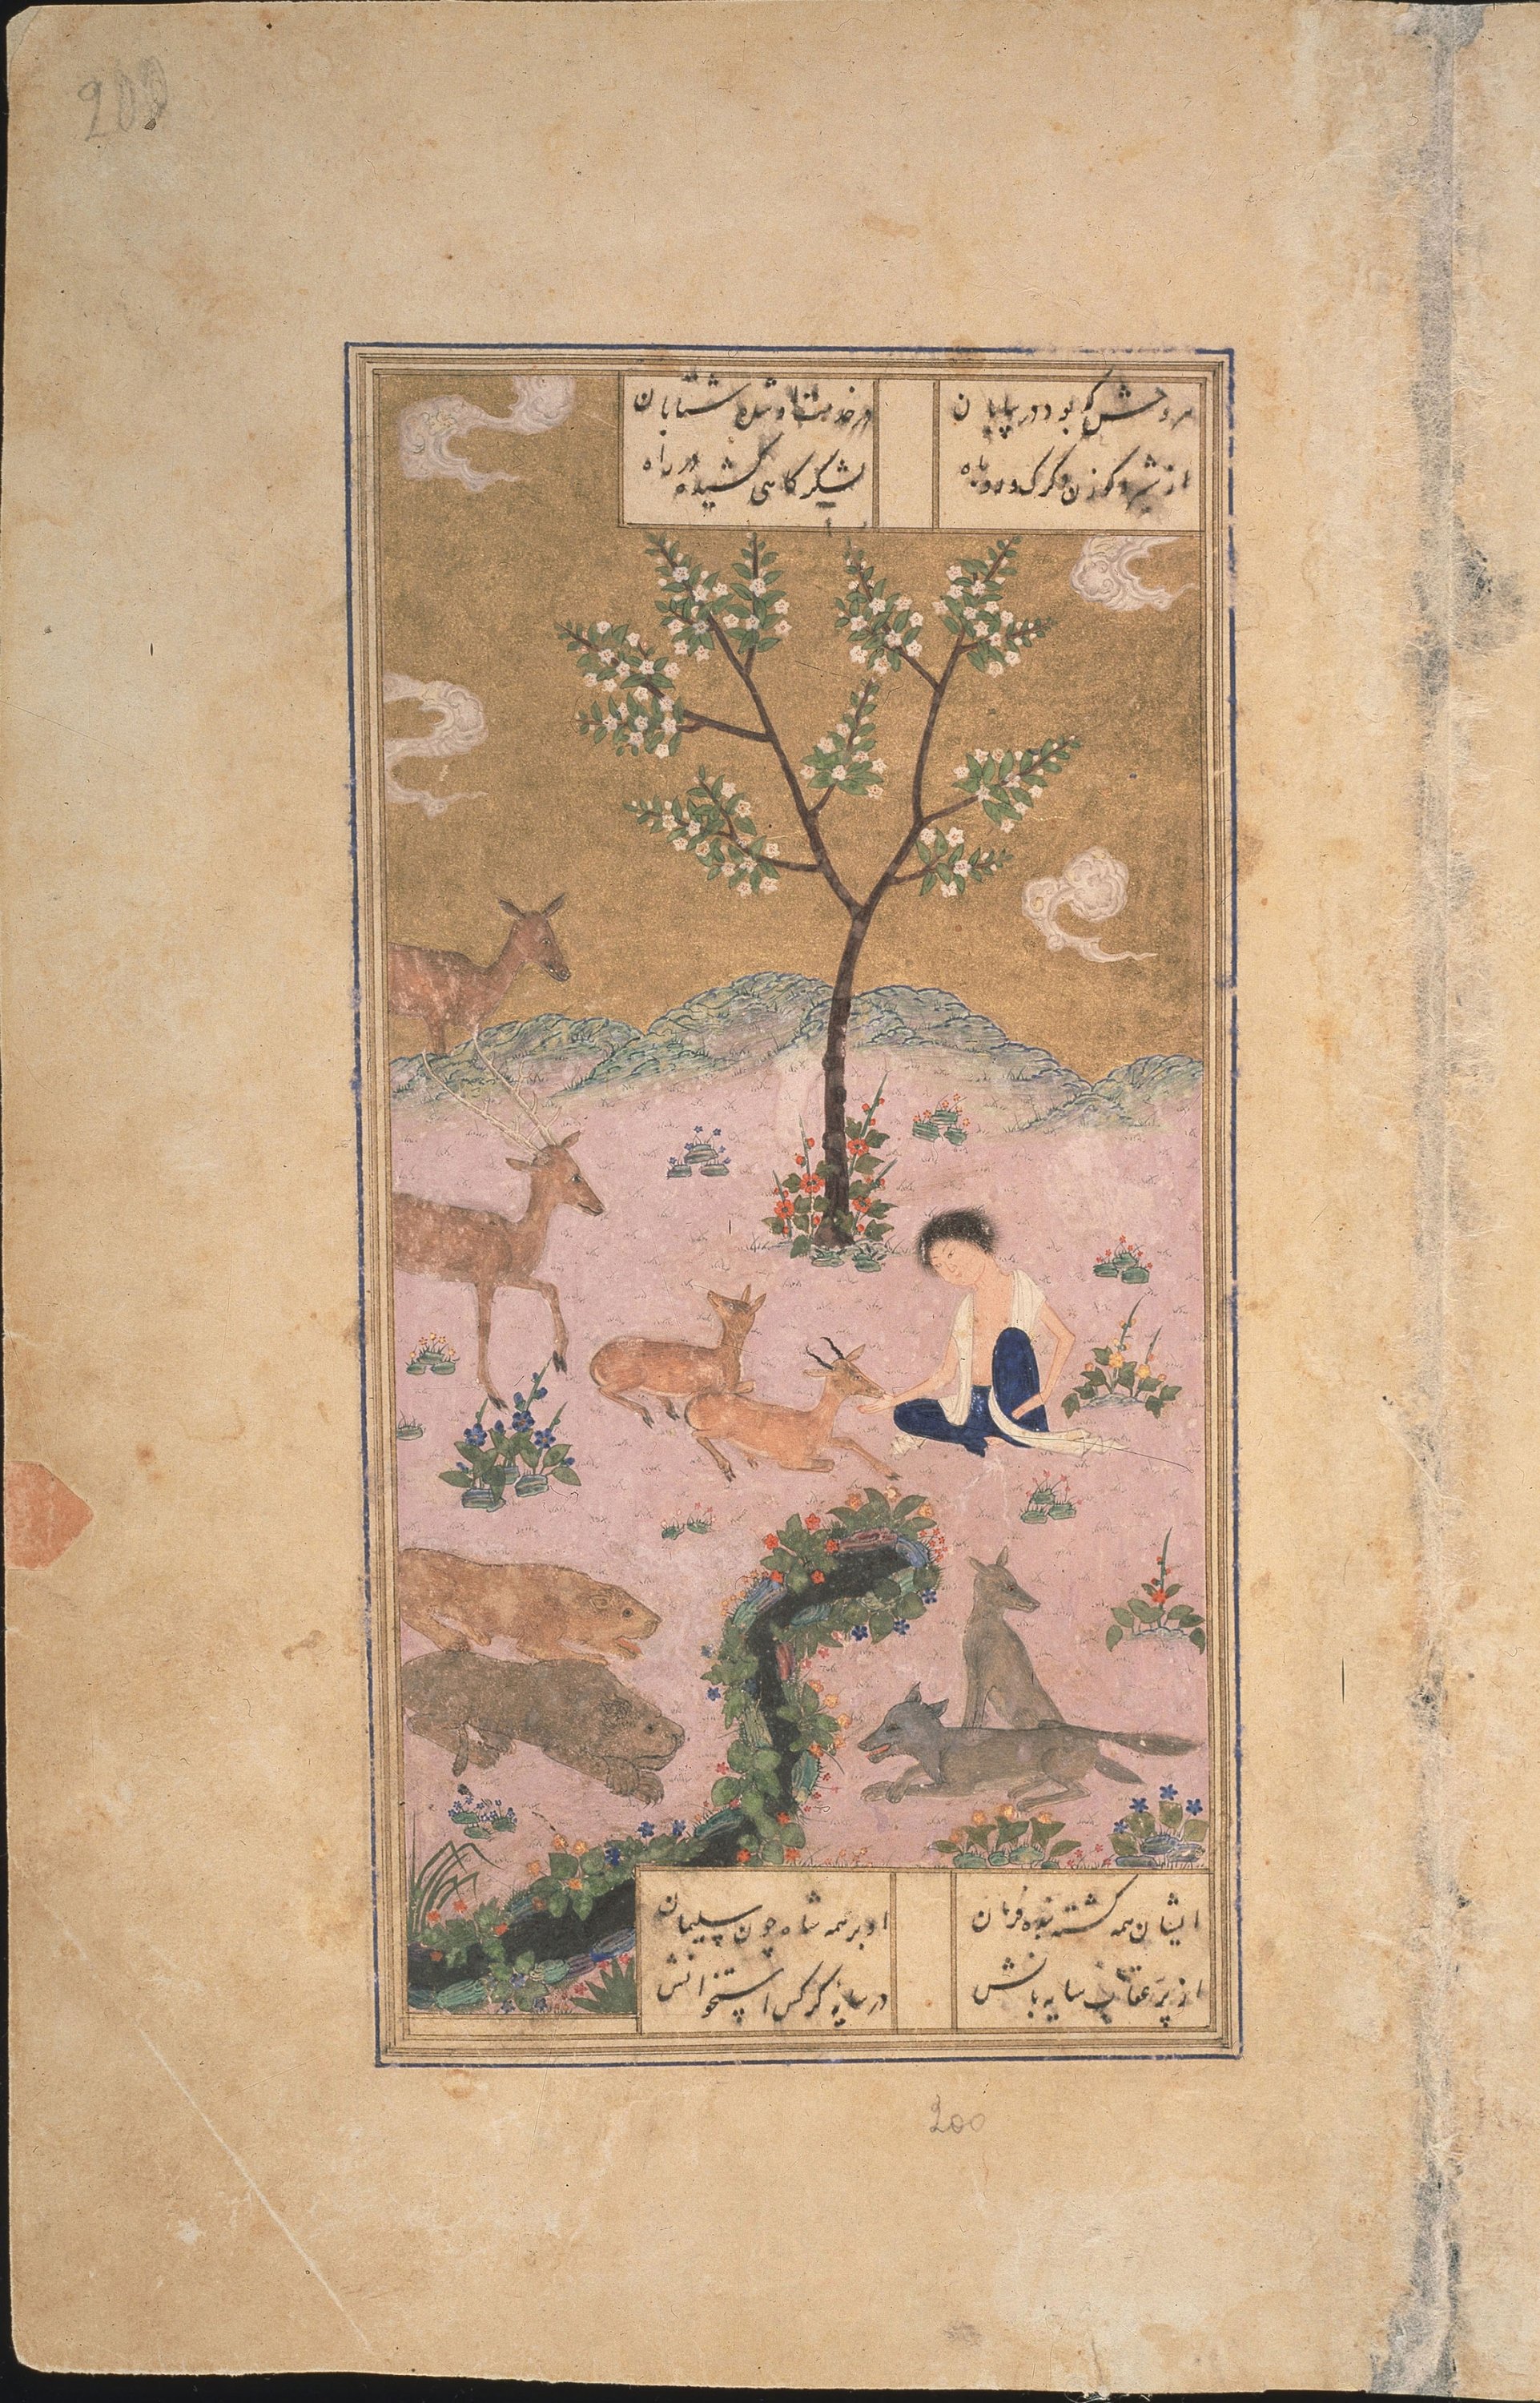 Majnun in the Desert, 1431 from the collection of the State Hermitage, St. Petersburg. (Photo by Fine Art Images/Heritage Images/Getty Images)